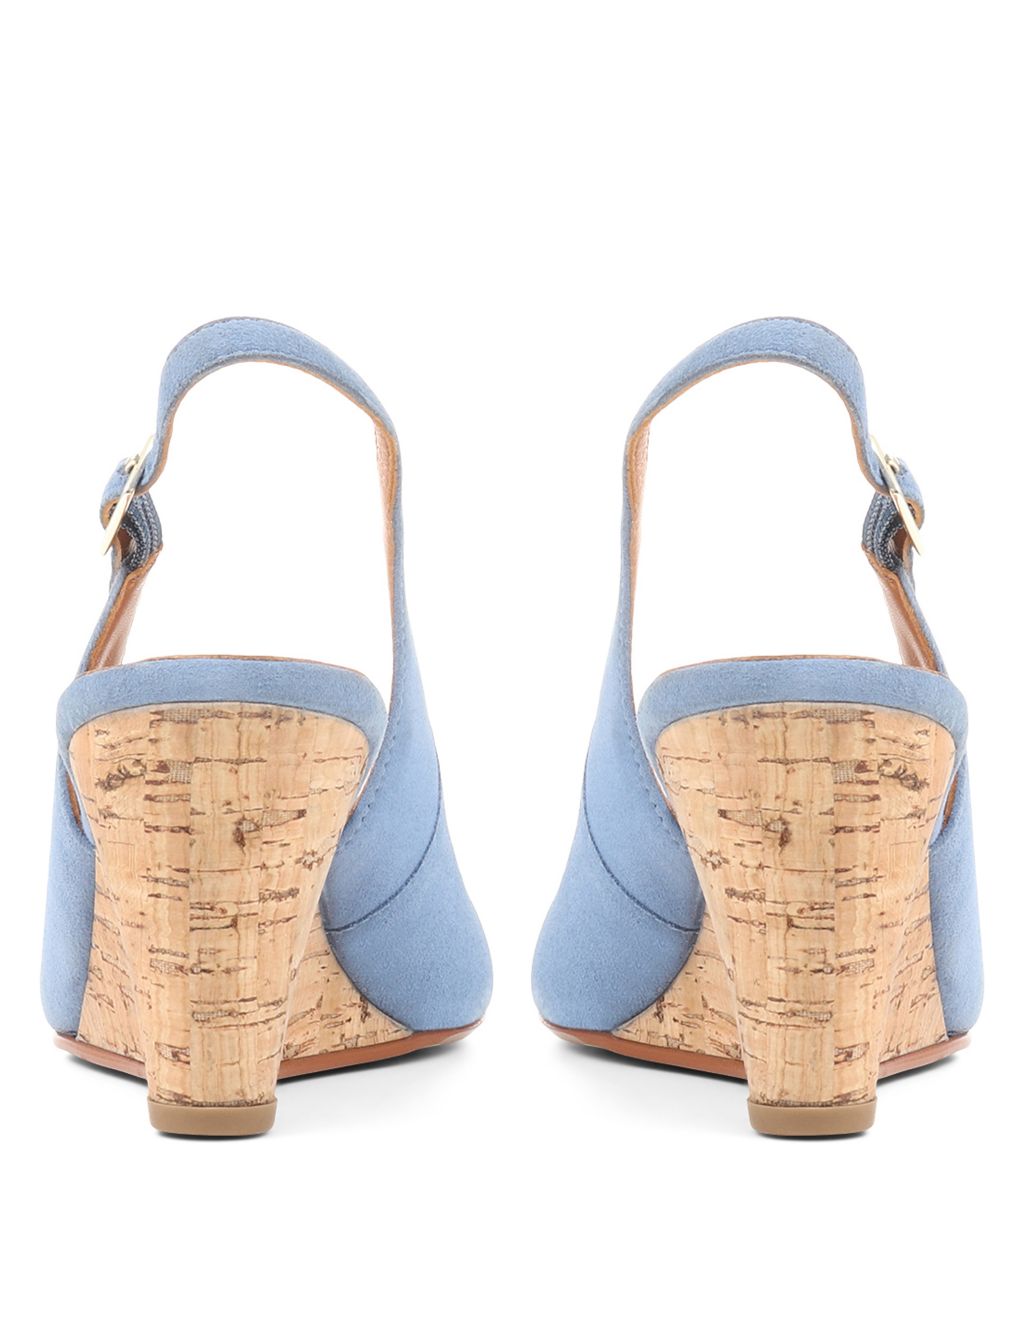 Suede Wedge Slingback Shoes image 4